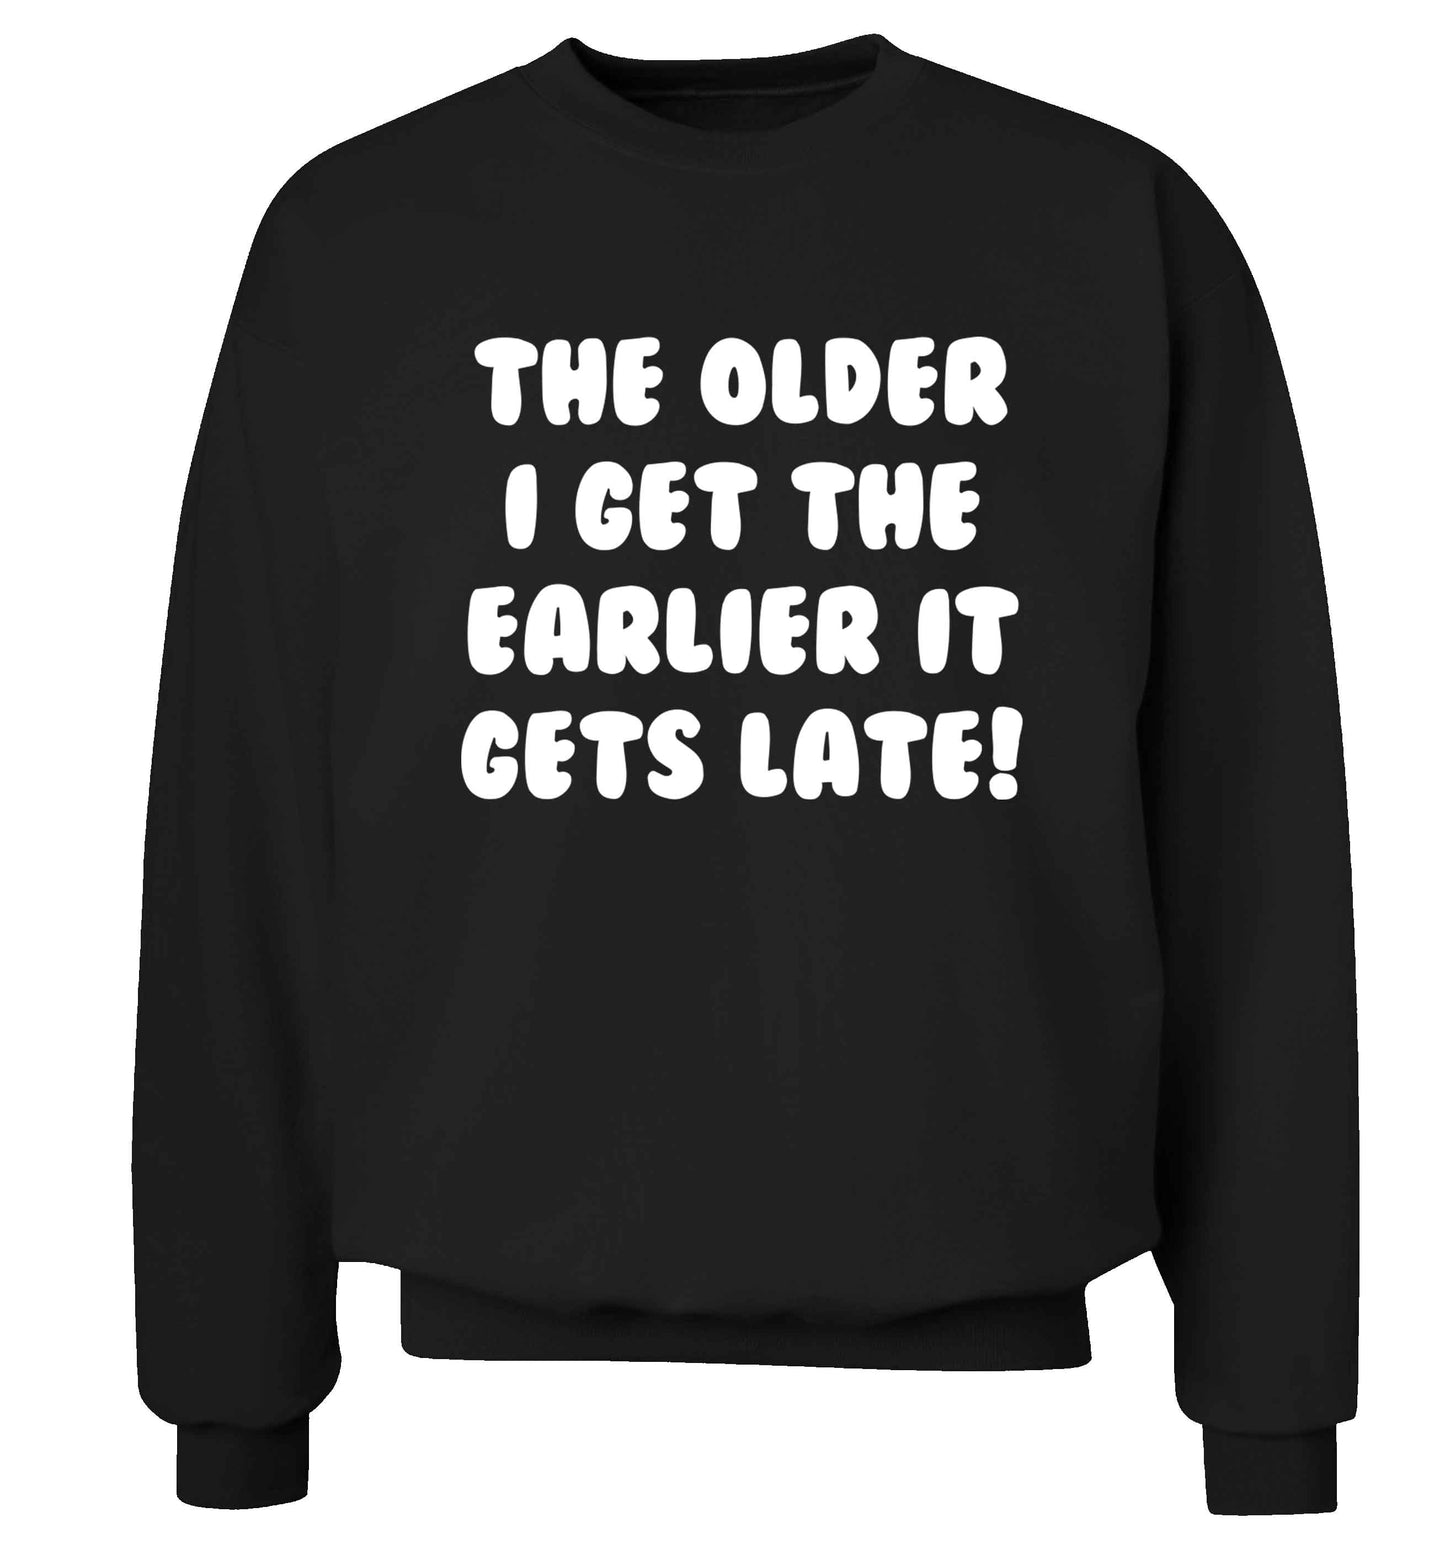 The older I get the earlier it gets late! Adult's unisex black Sweater 2XL